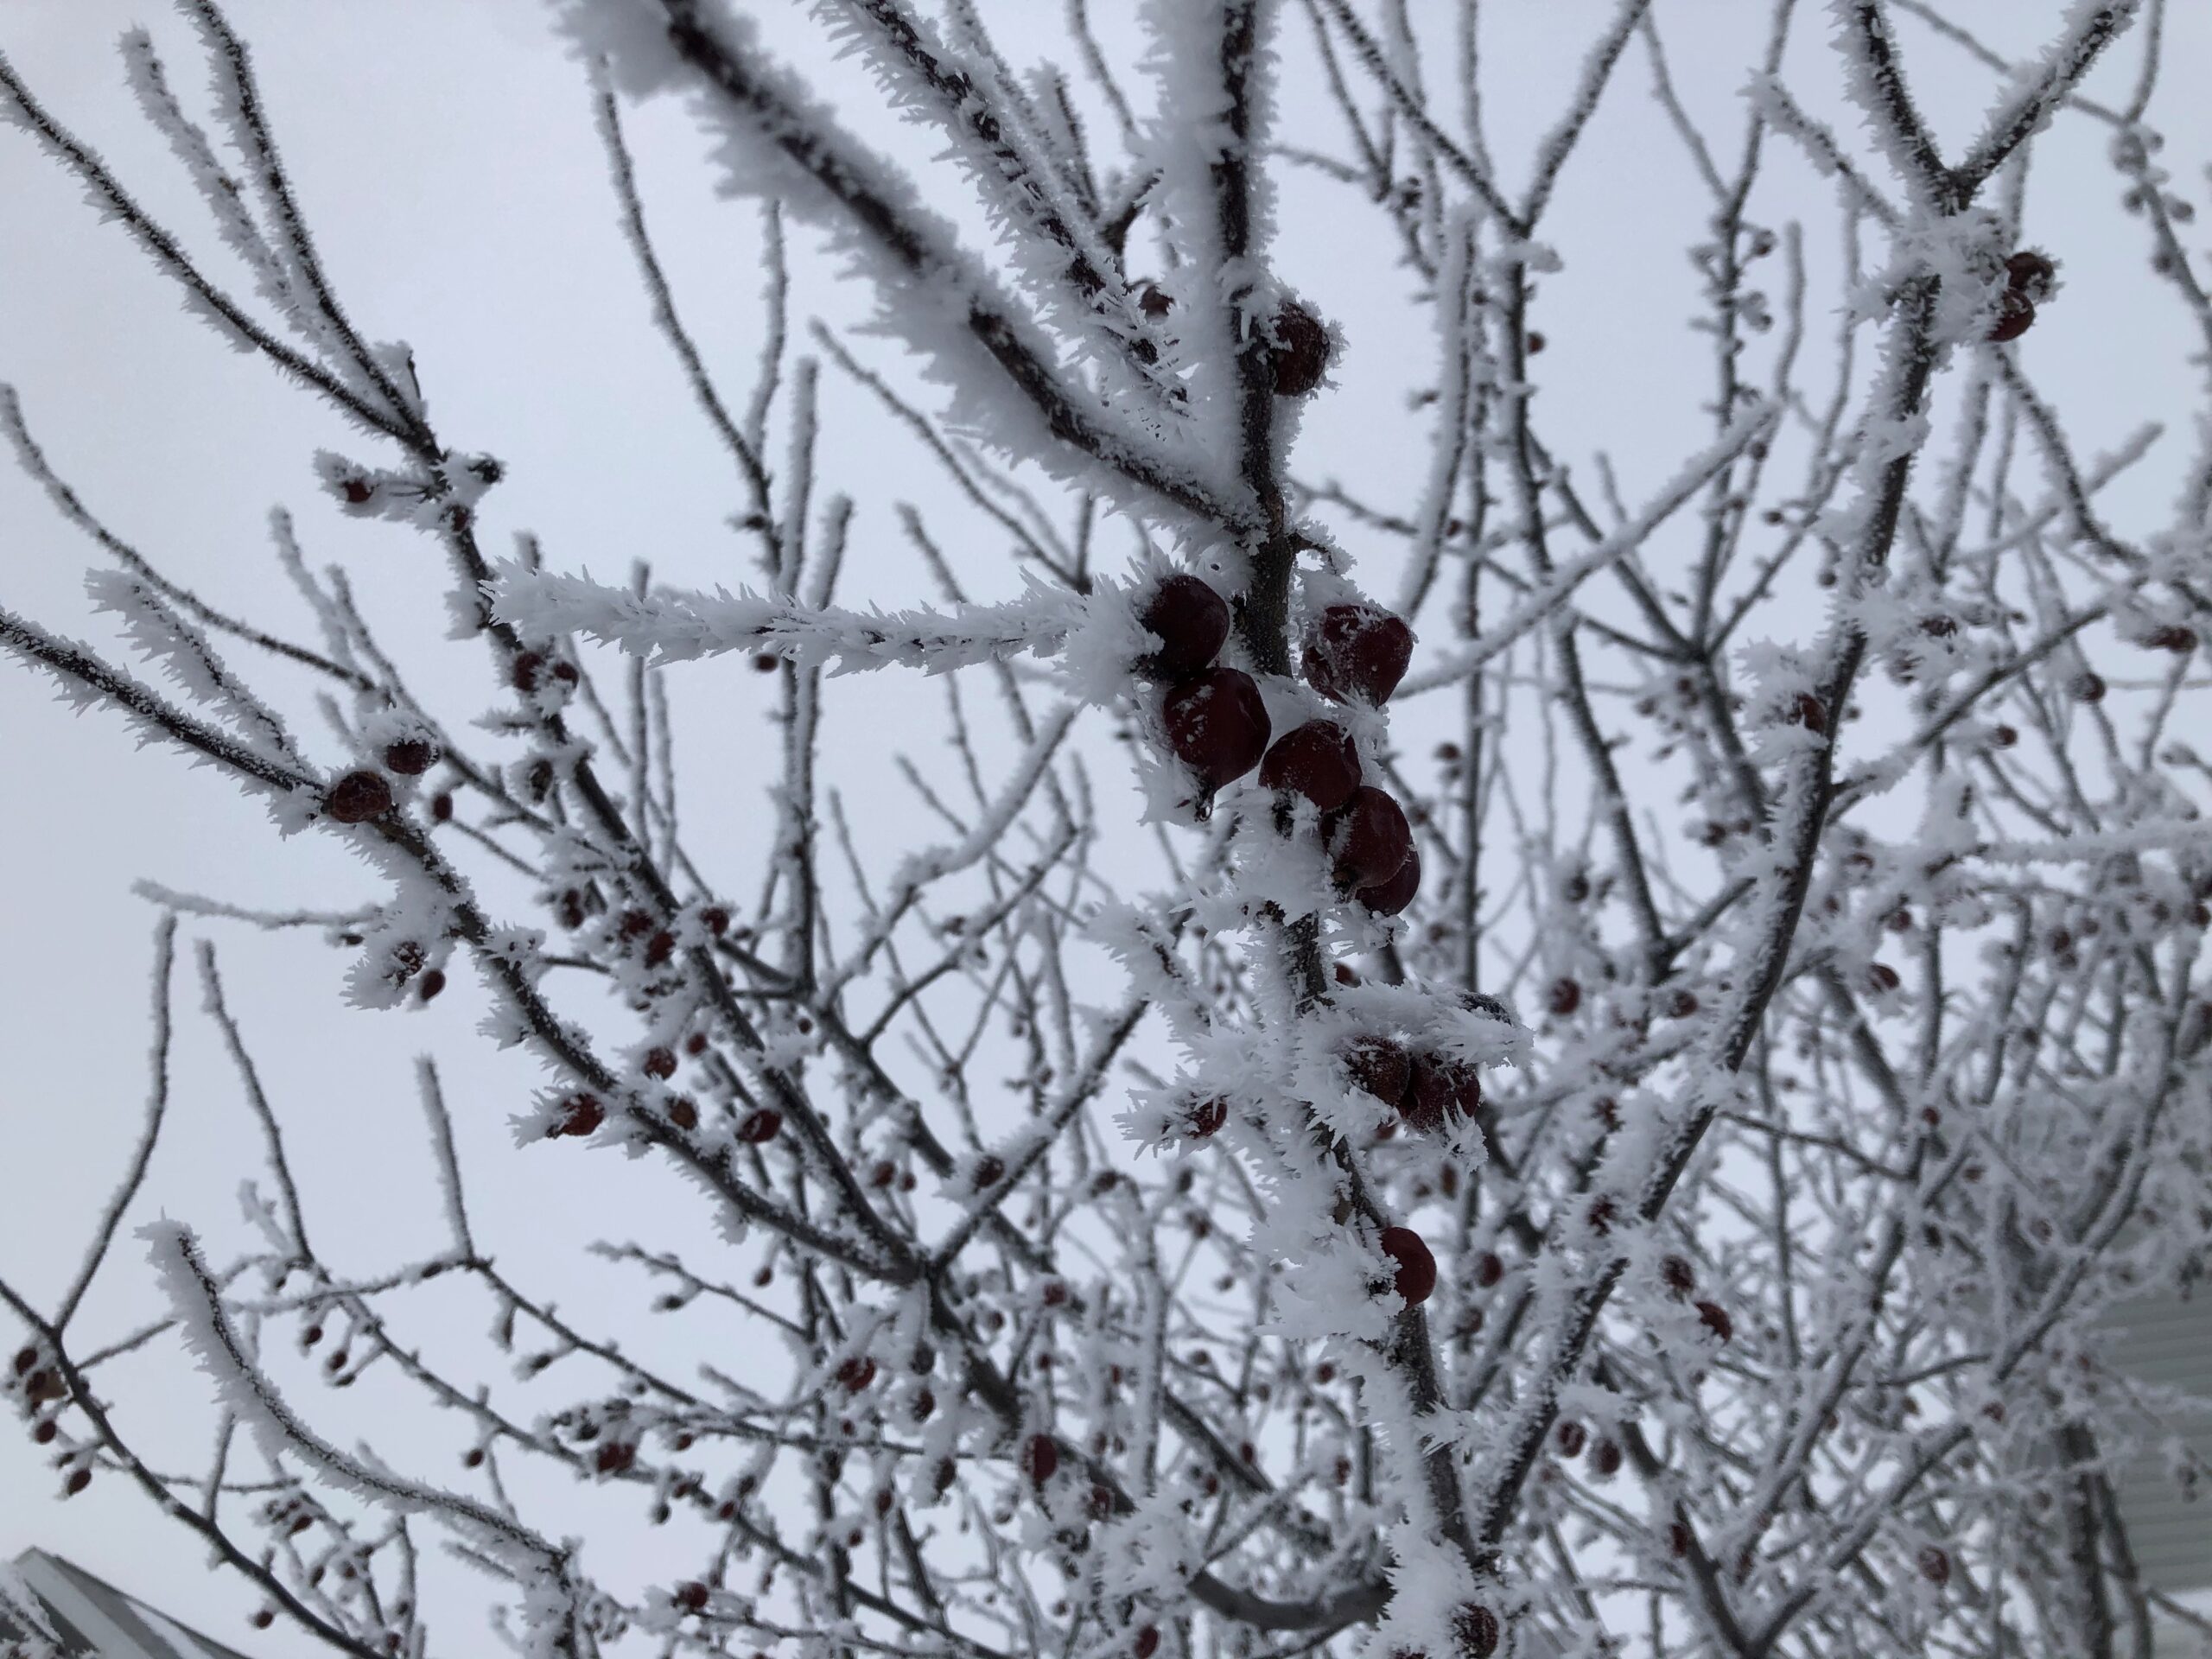 A close-up photo showing rime ice on crabapple branches